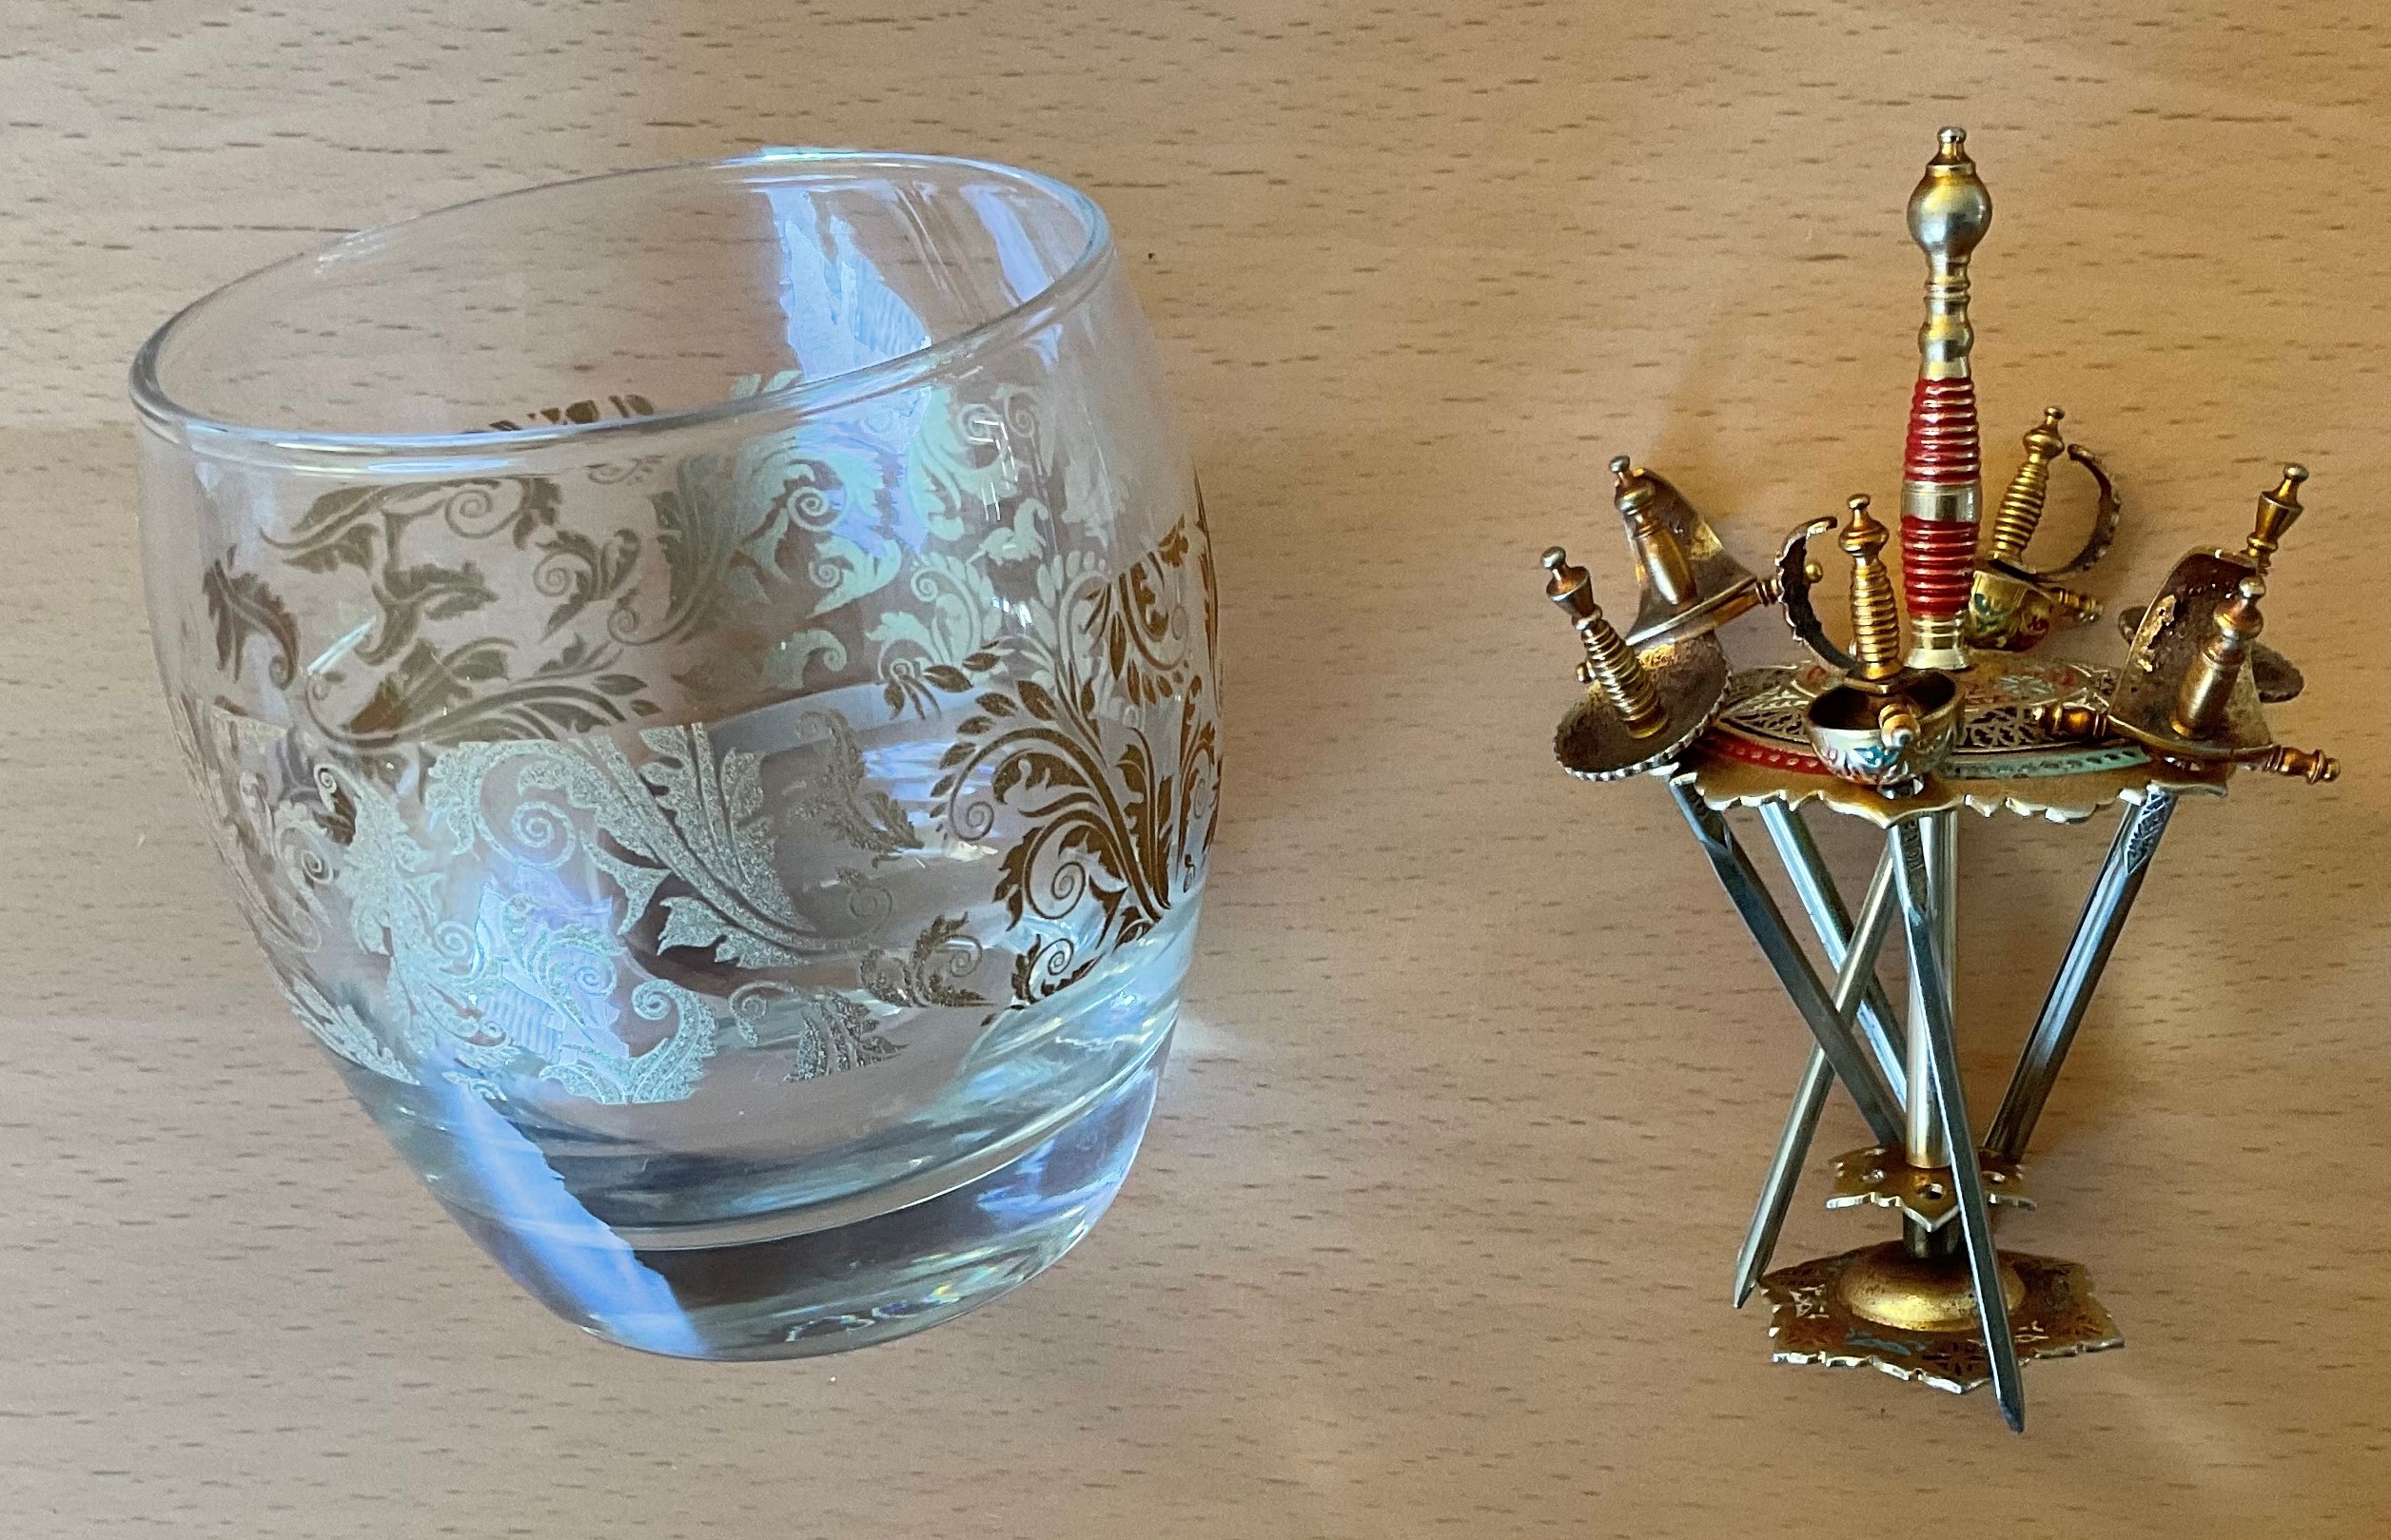 A small tumbler glass with 6 miniature gold plated swords. Glass measures 3.5 inches in height.